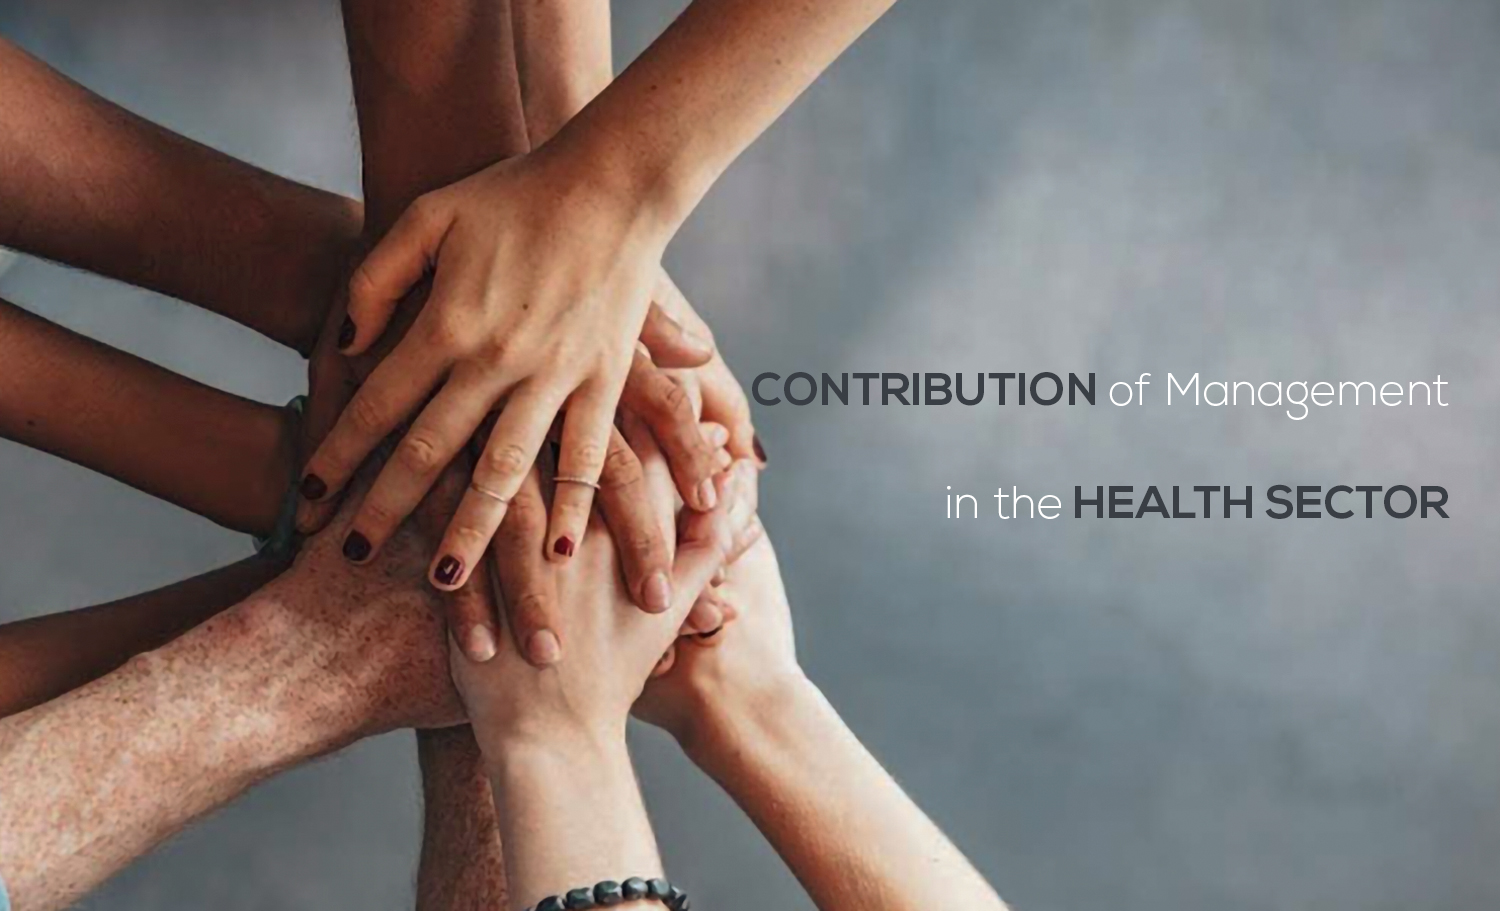 Contribution of Management in the Health Sector